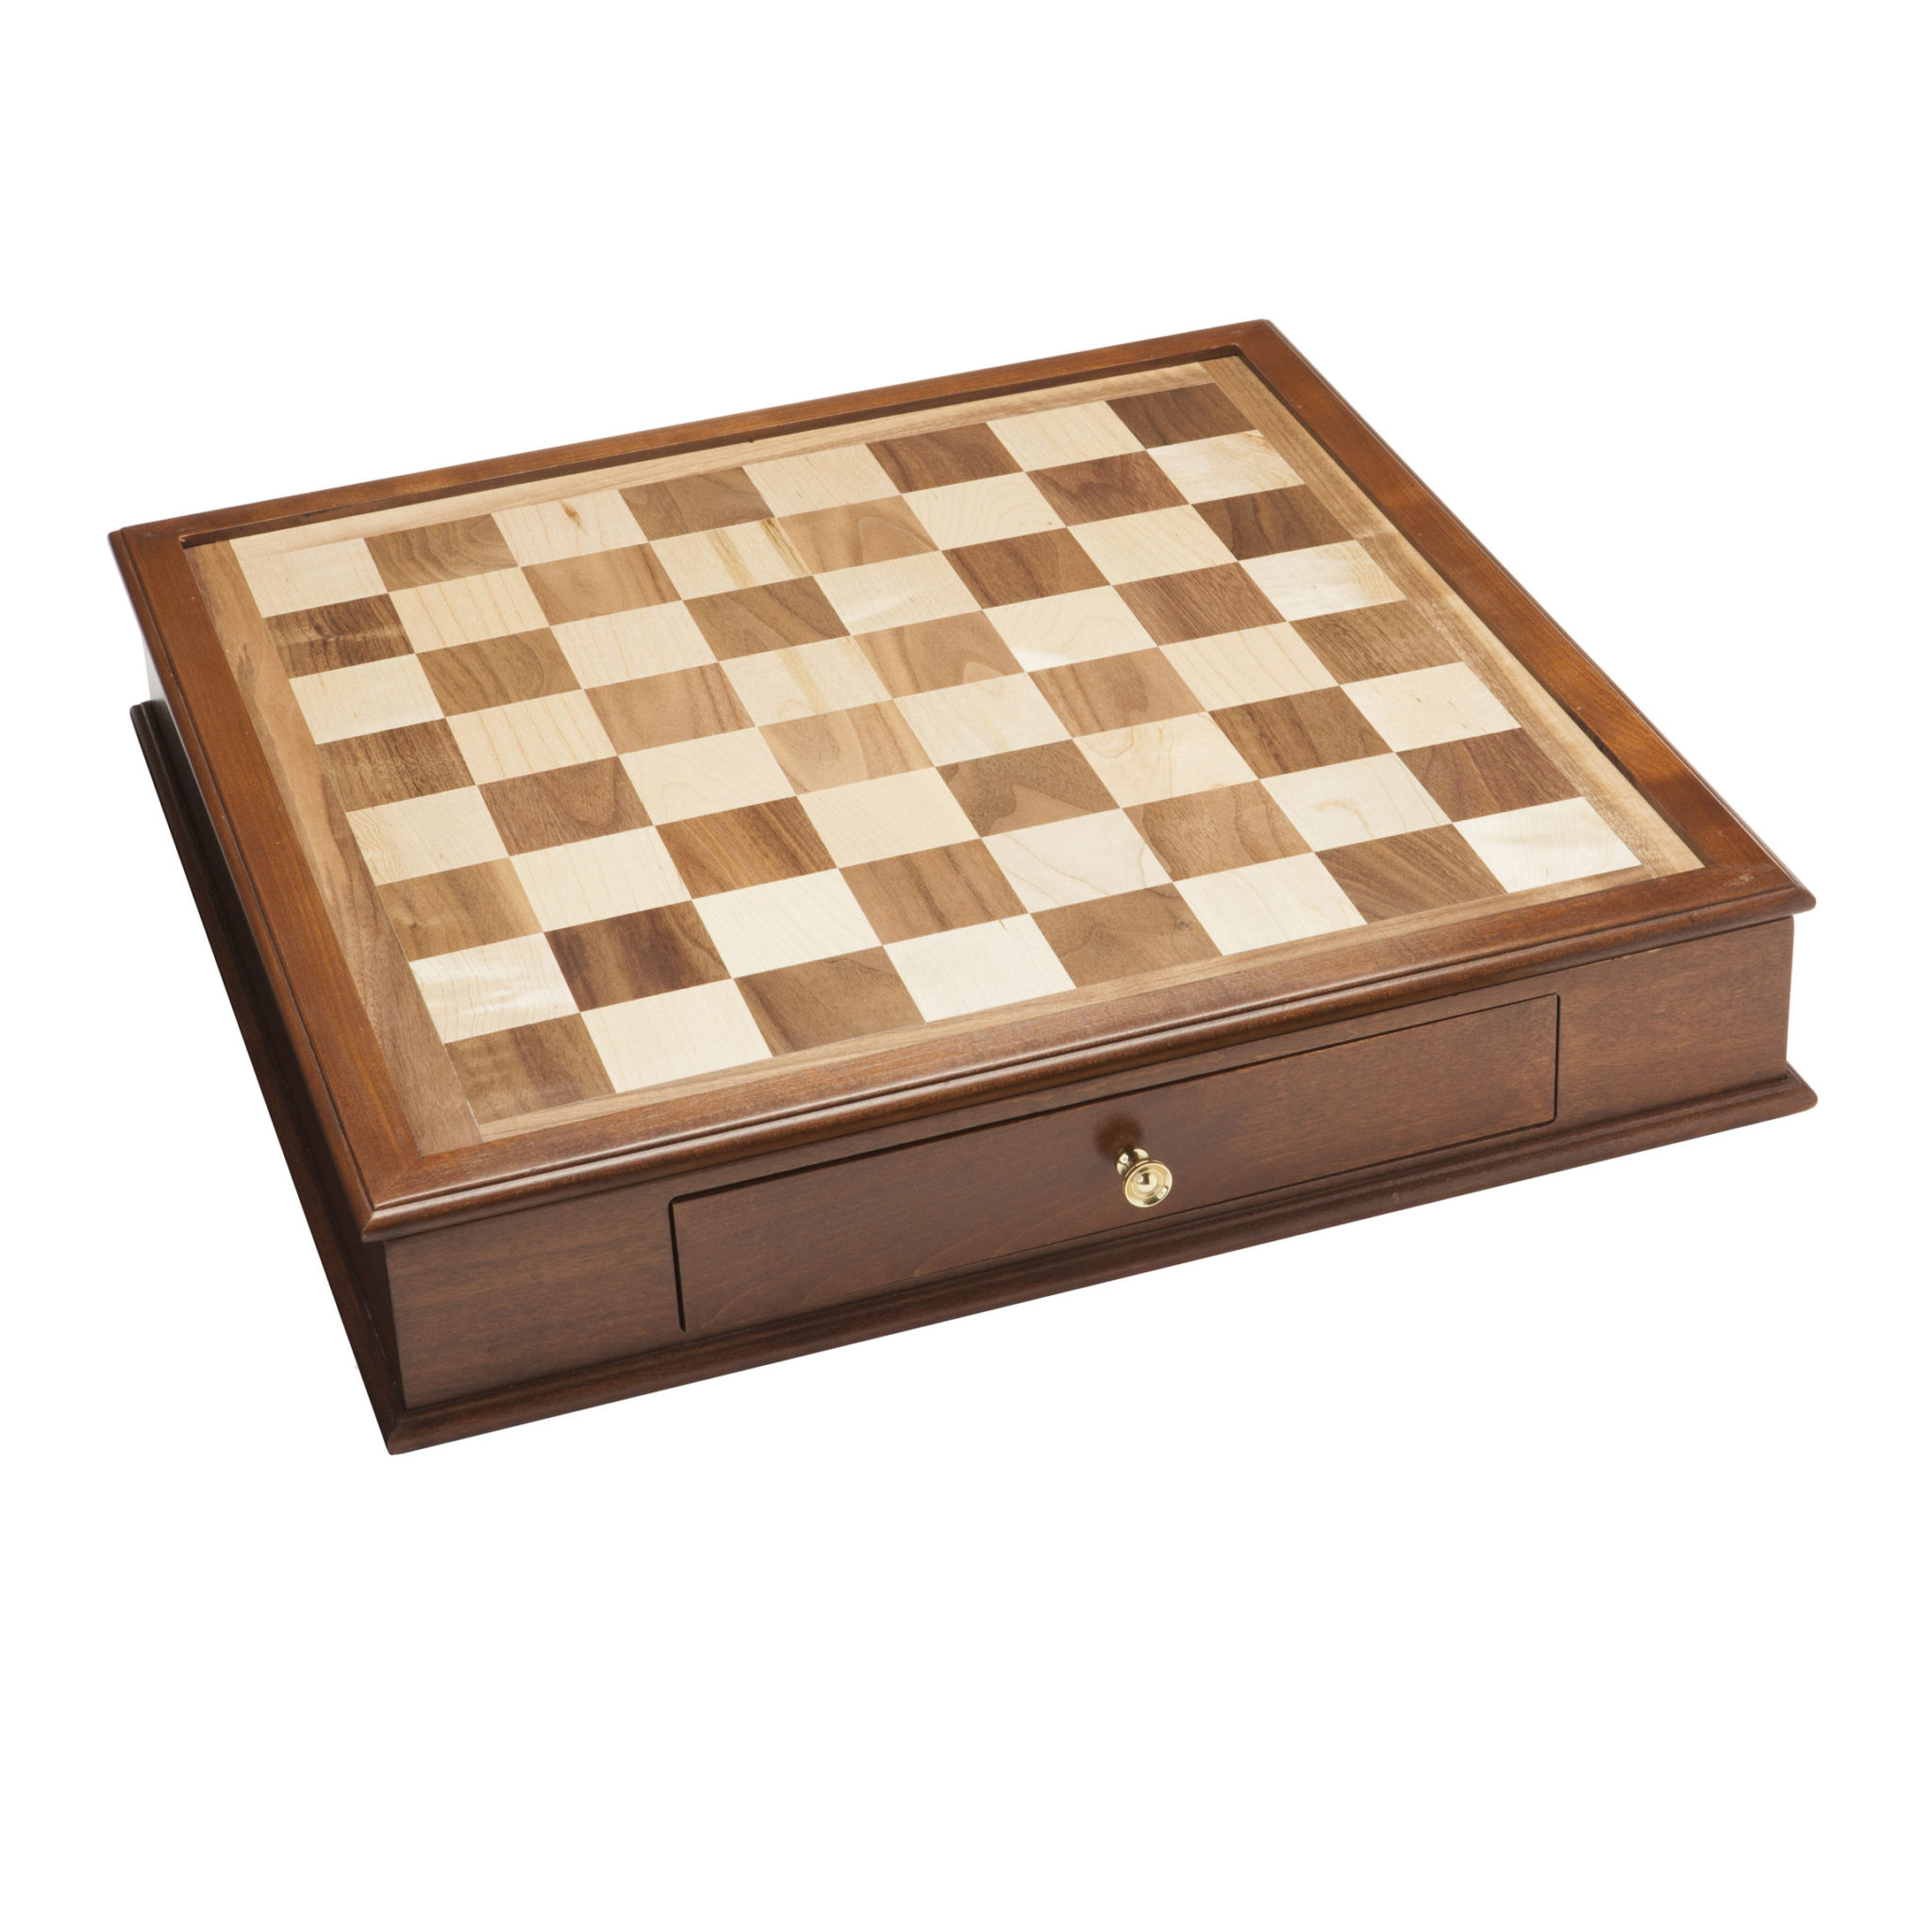 Grand English Chess Set with Storage Drawers – Weighted ...